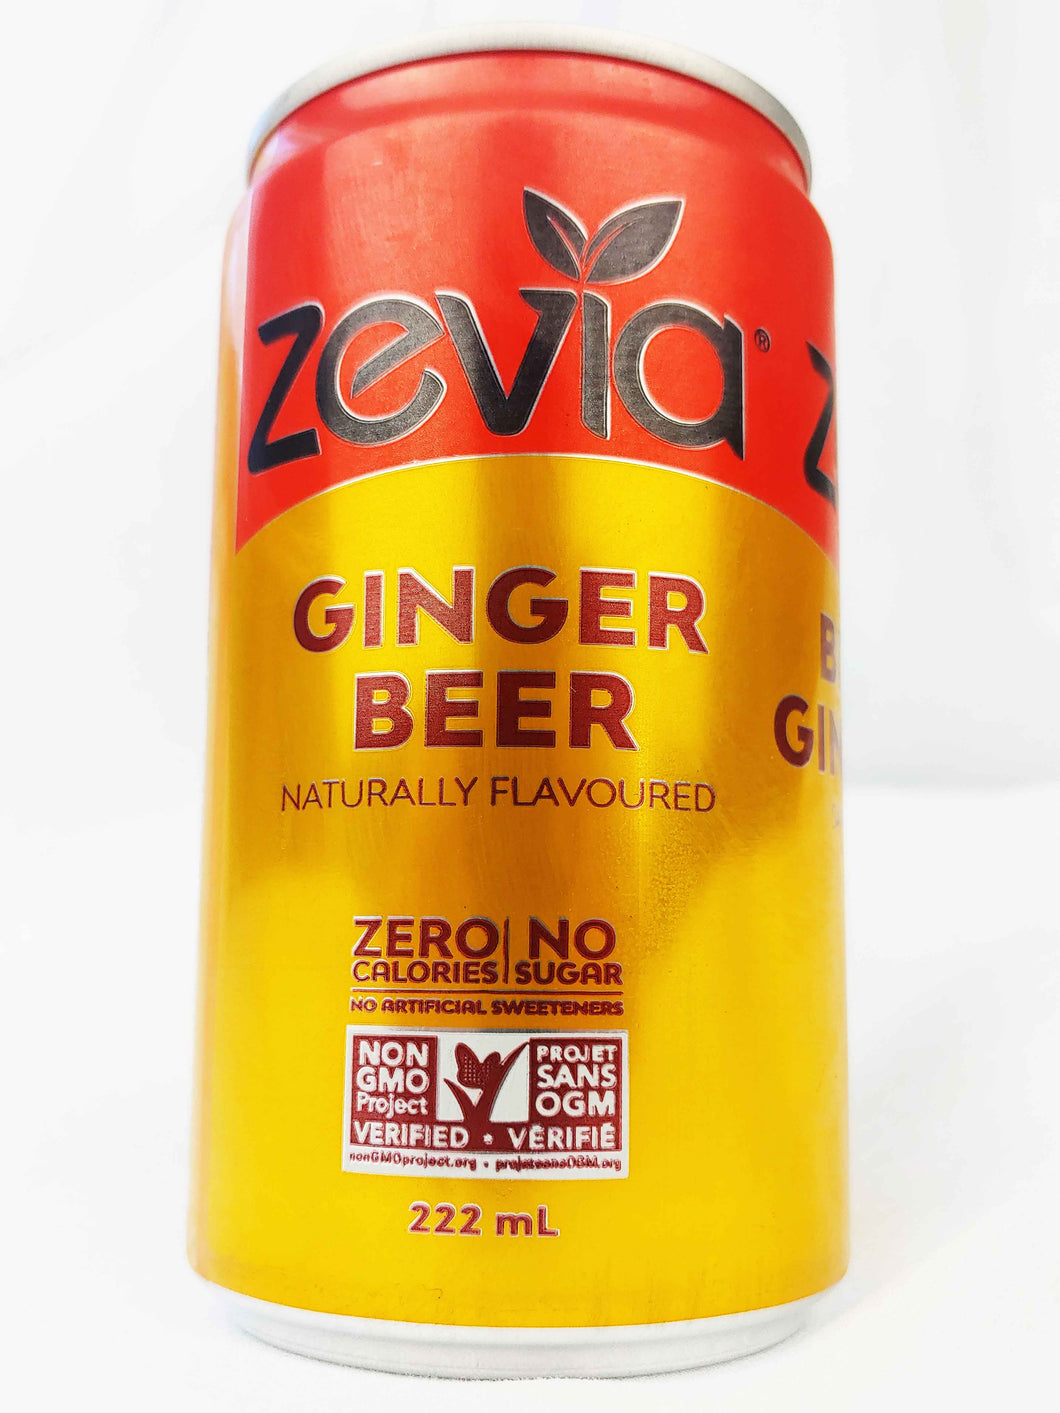 Zevia Ginger Beer case of six 222ml cans